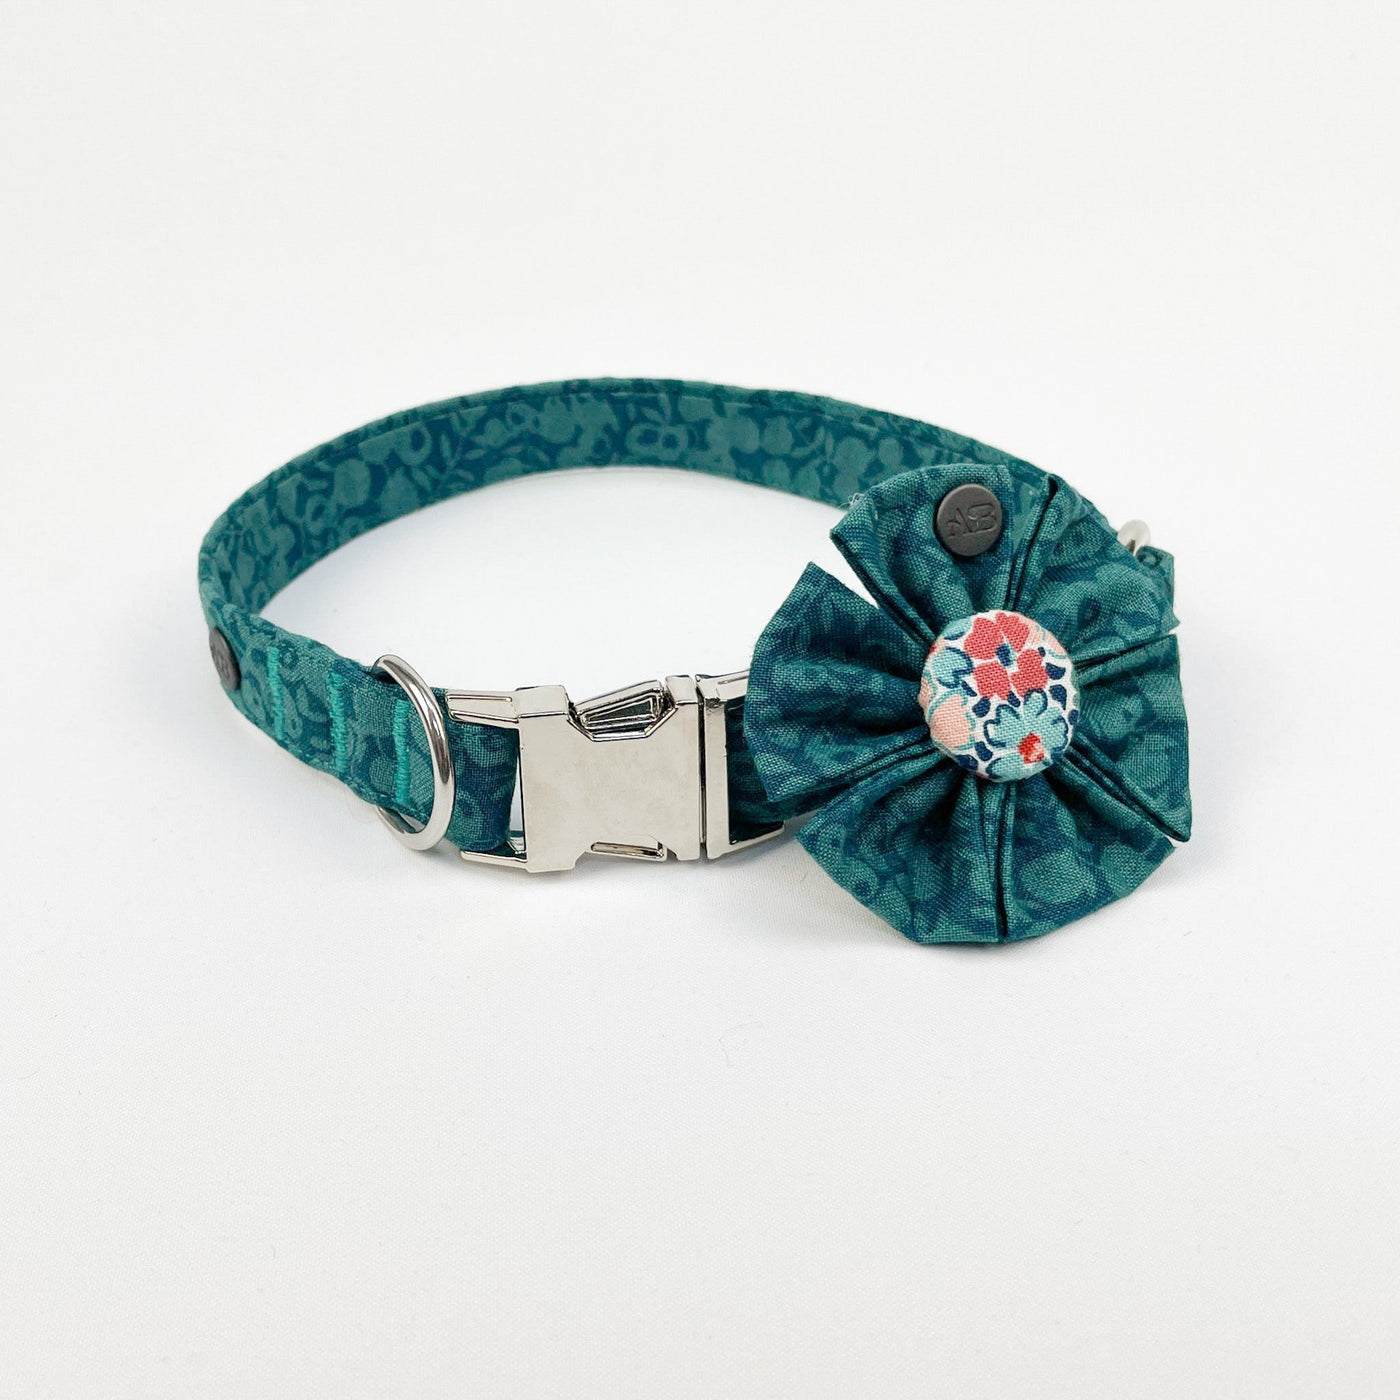 Liberty Autumn Emerald Dog Collar Flower Accessory shown on Liberty Winter Floral collar with silver hardware.